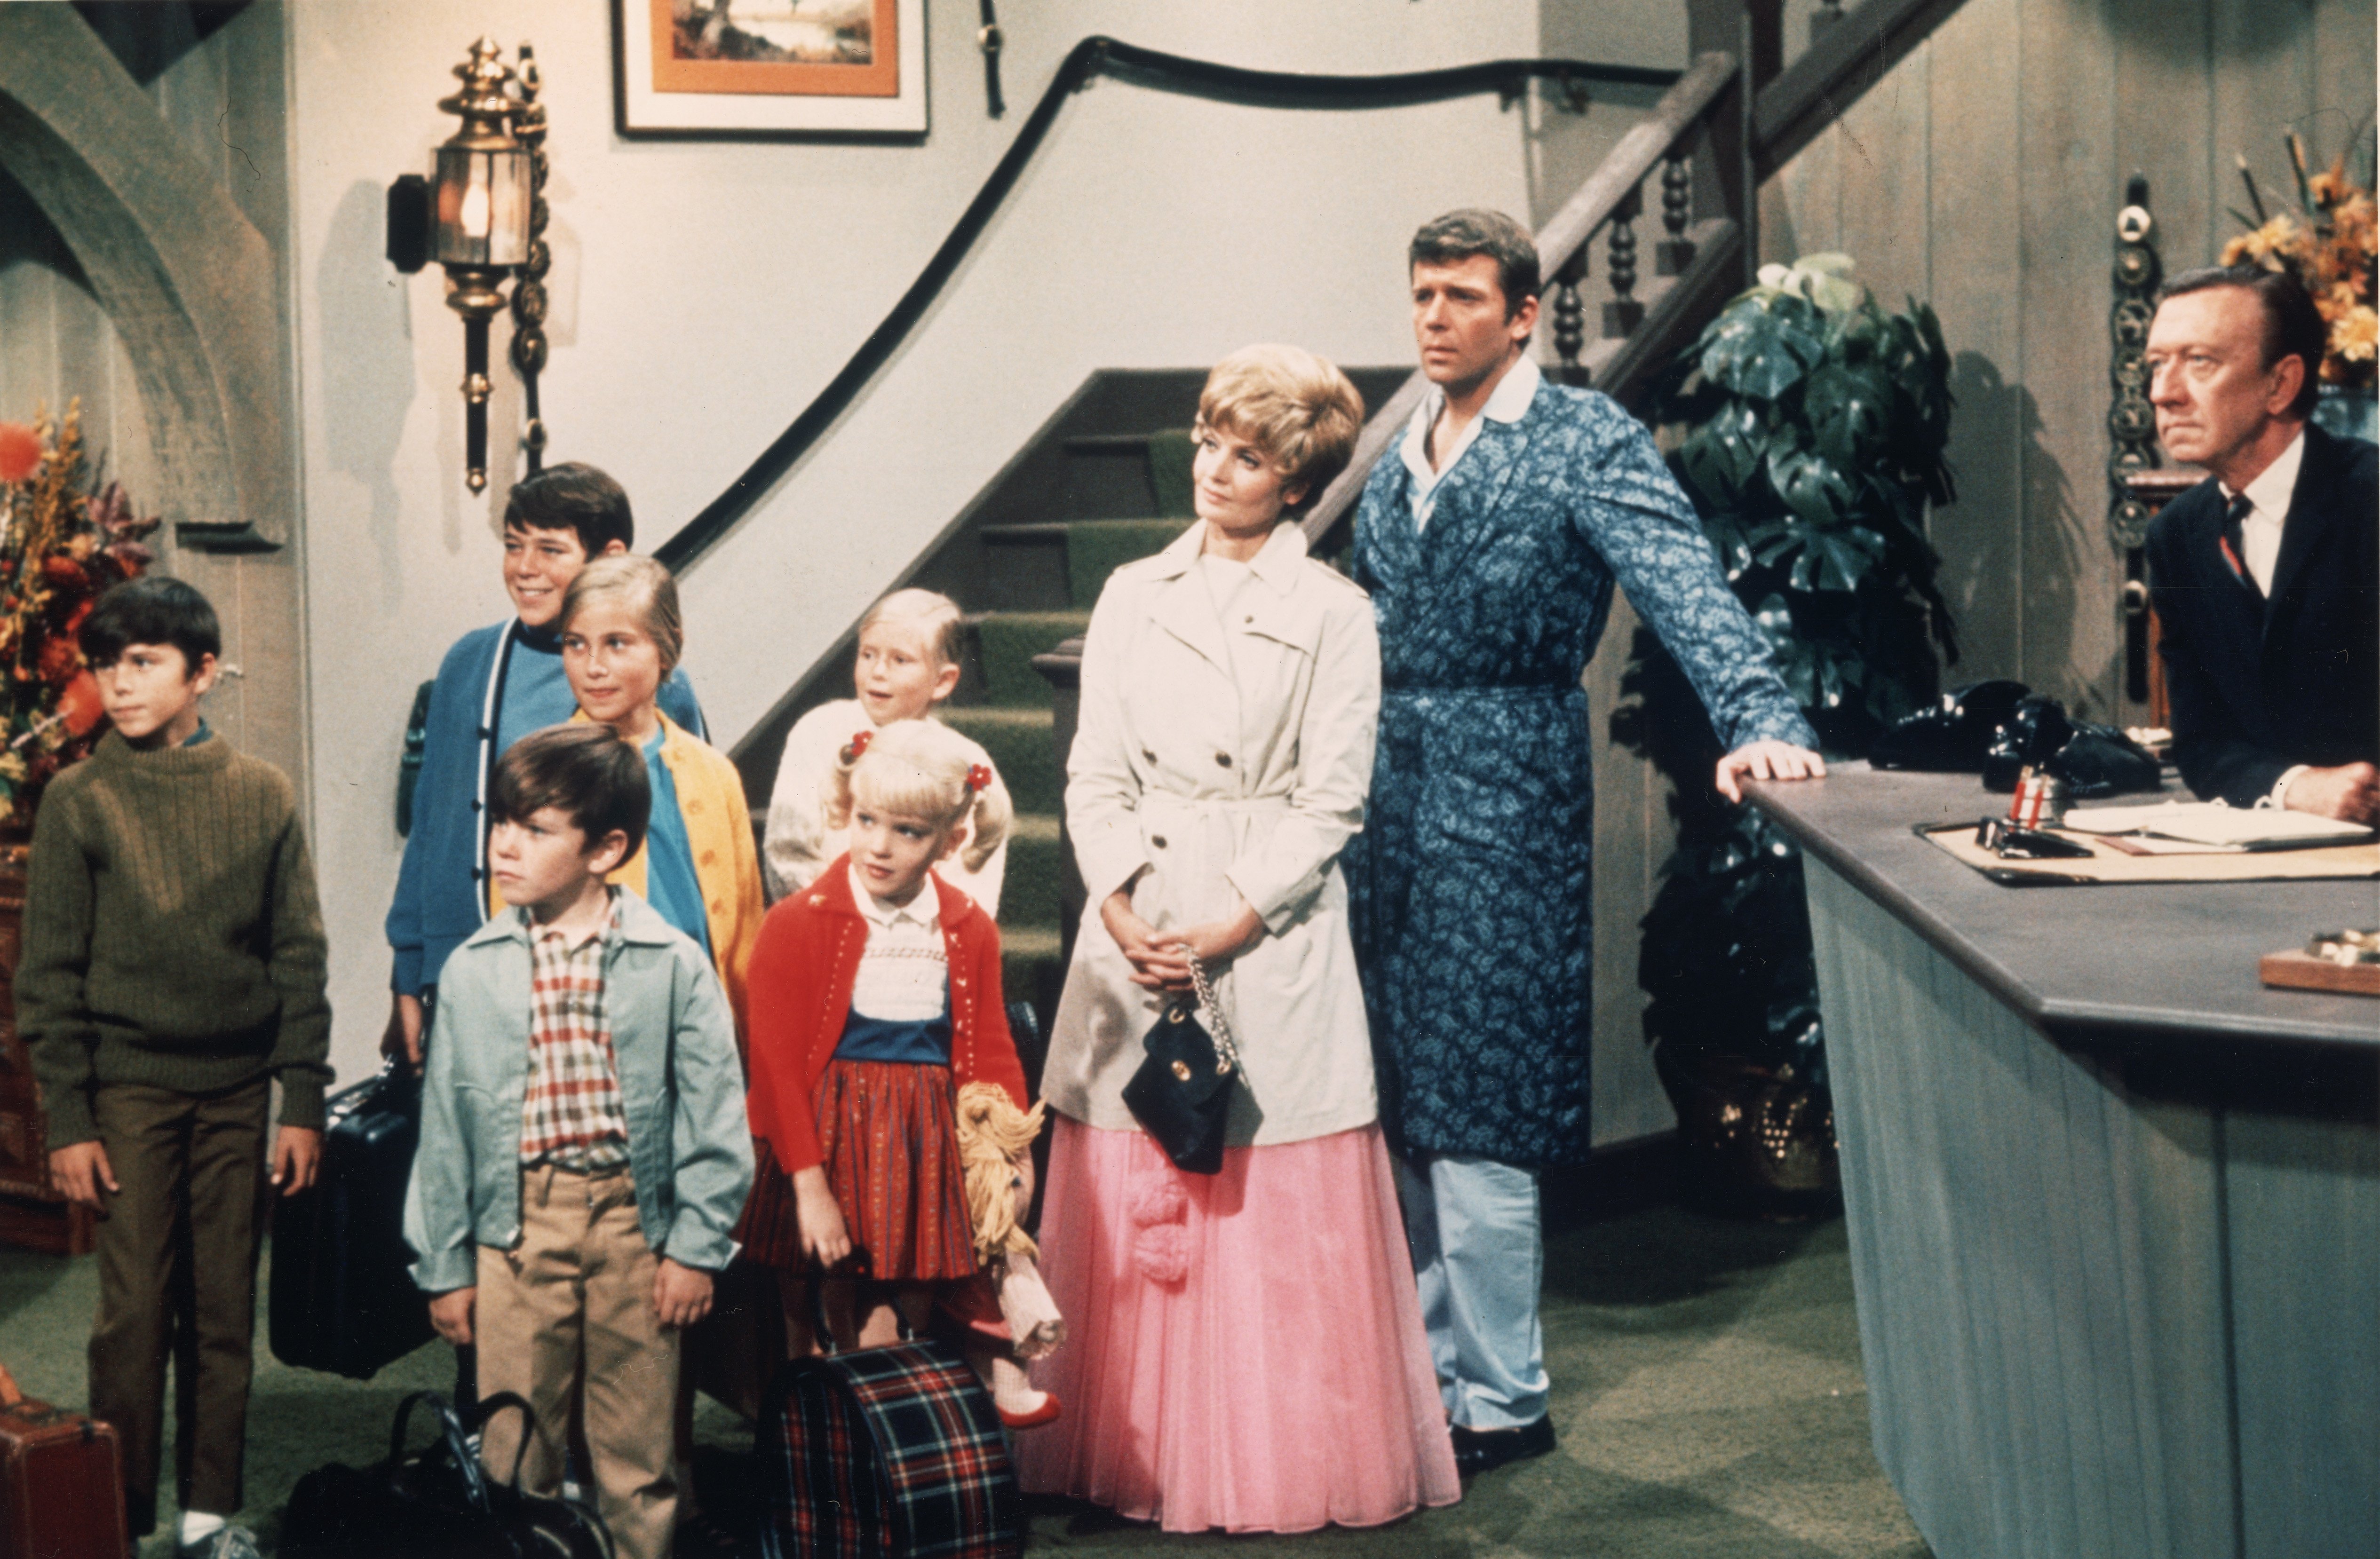 "The Brady Bunch's" Robert Reed and Florence Henderson stand with Christopher Knight, Barry Williams, Mike Lookinland, Maureen McCormick, Eve Plumb, Susan Olsen, Henderson, Reed in a hotel lobby, circa 1969 | Photo: Getty Images